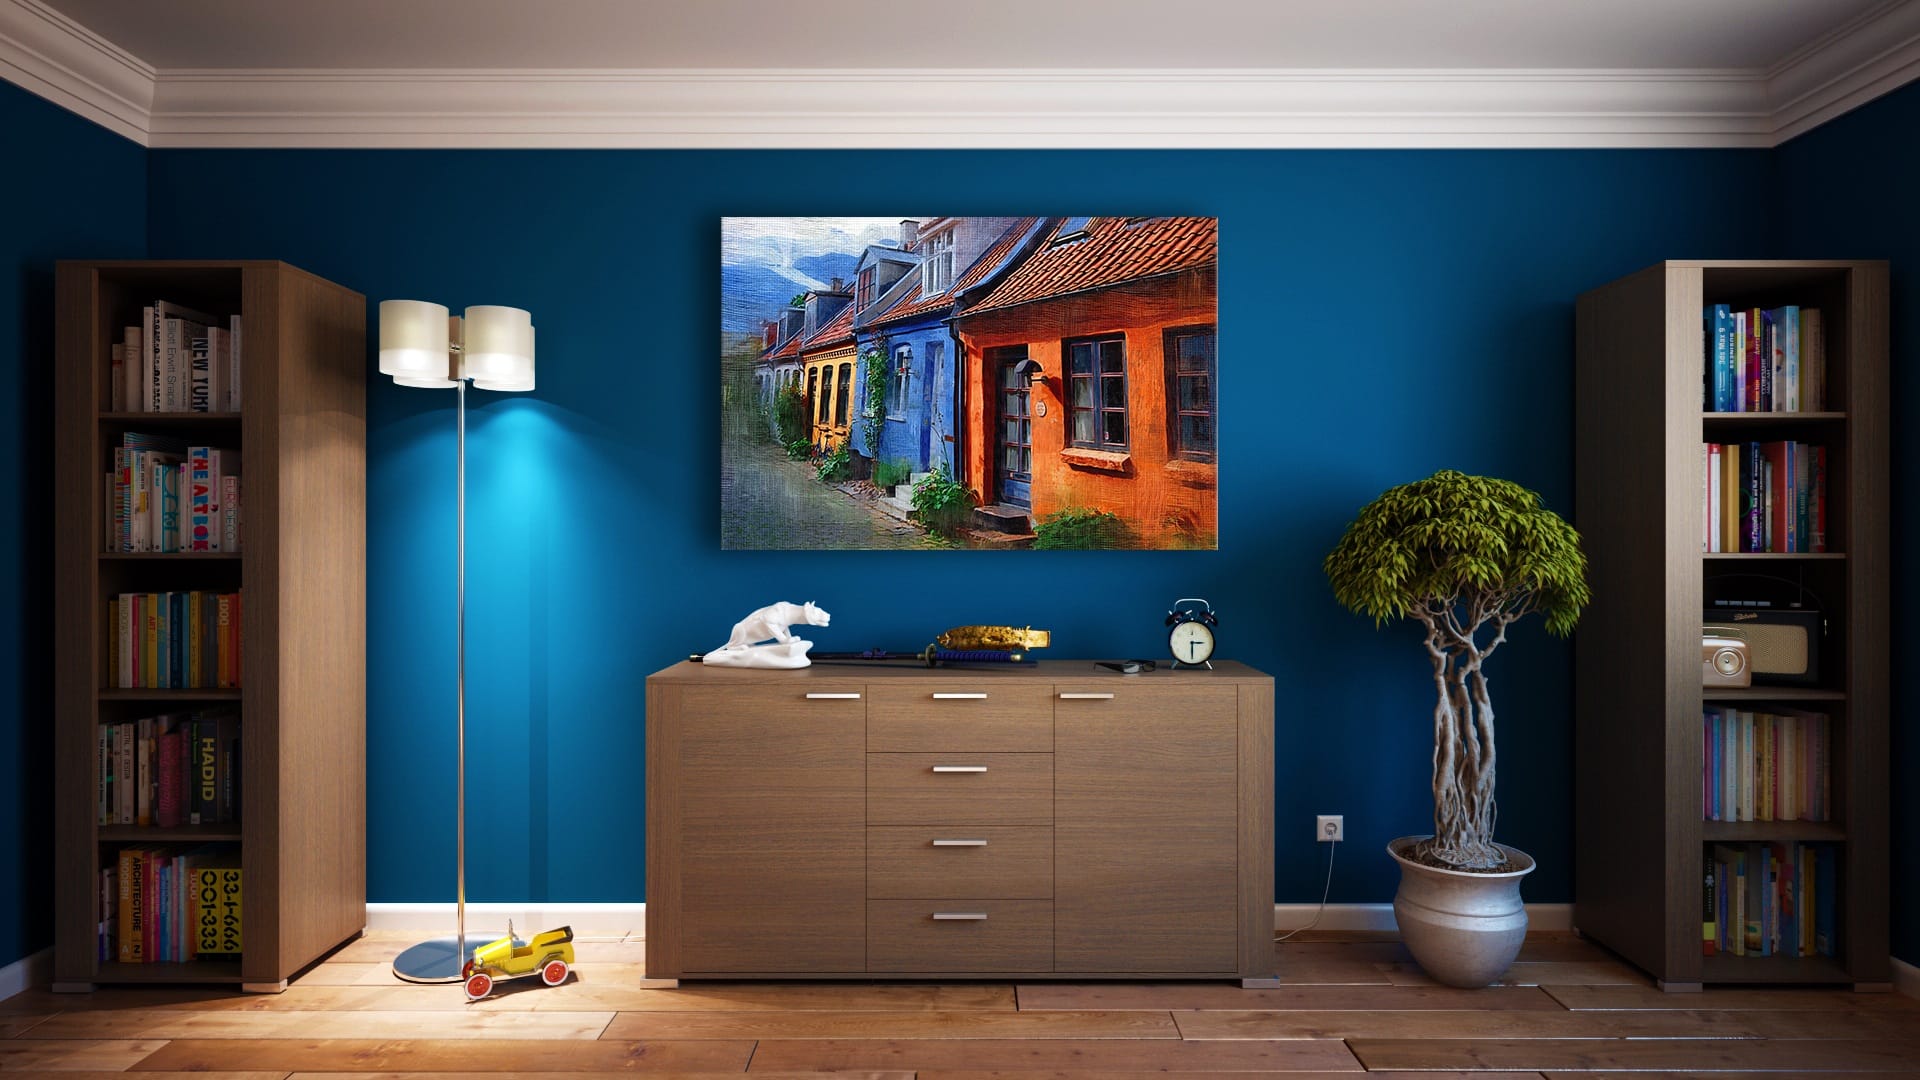 How Do The Colors Of Your Walls Affect Your Overall Mood